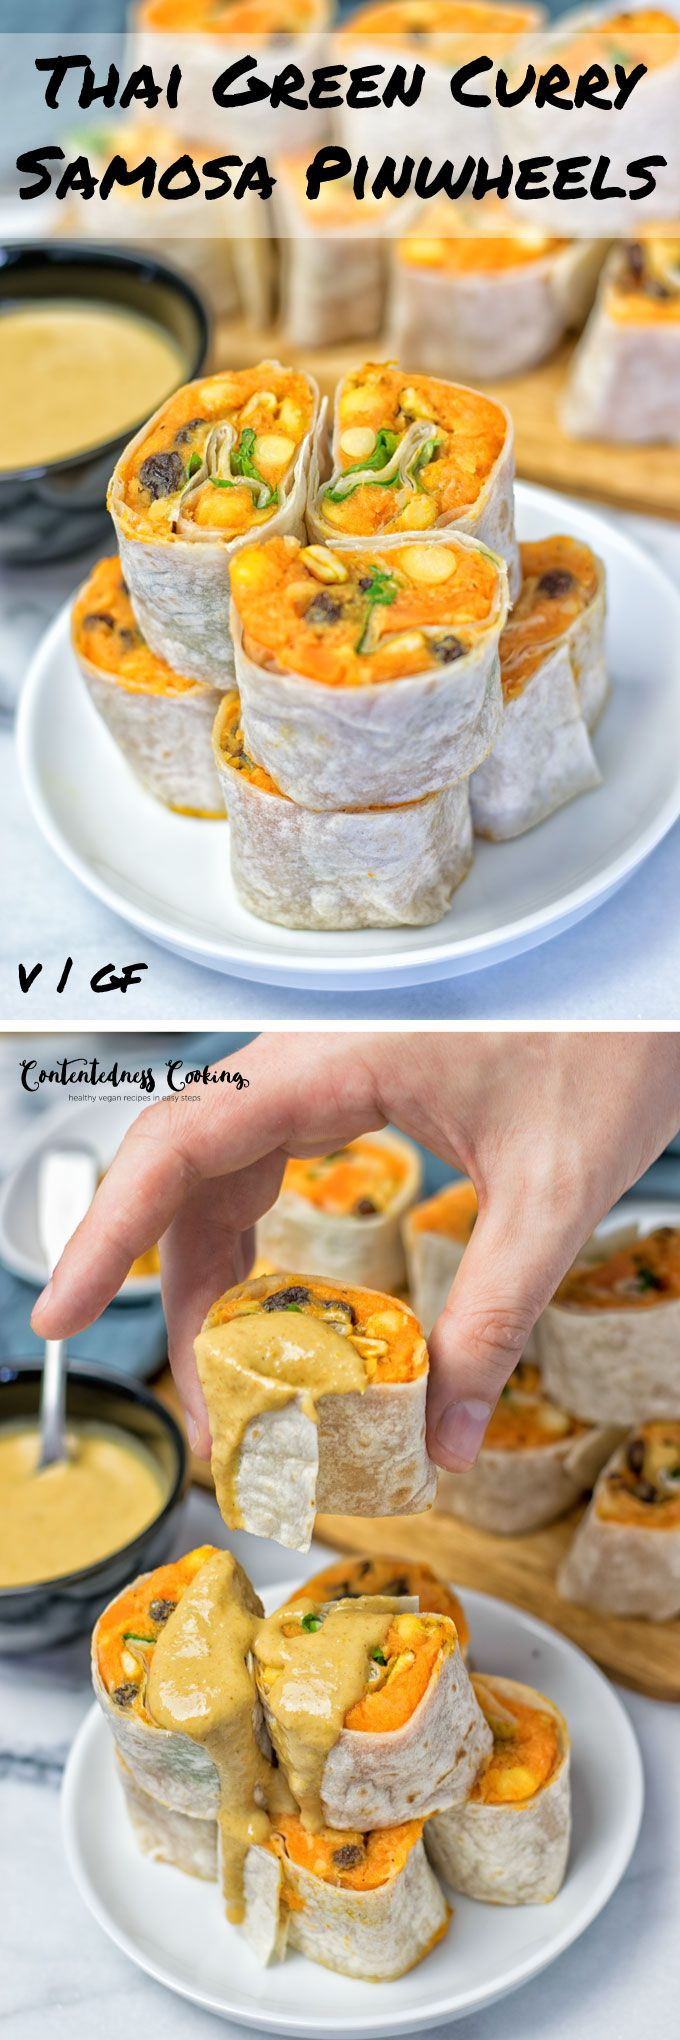 Indian Appetizers For Party
 Thai Green Curry Samosa Pinwheels Recipe